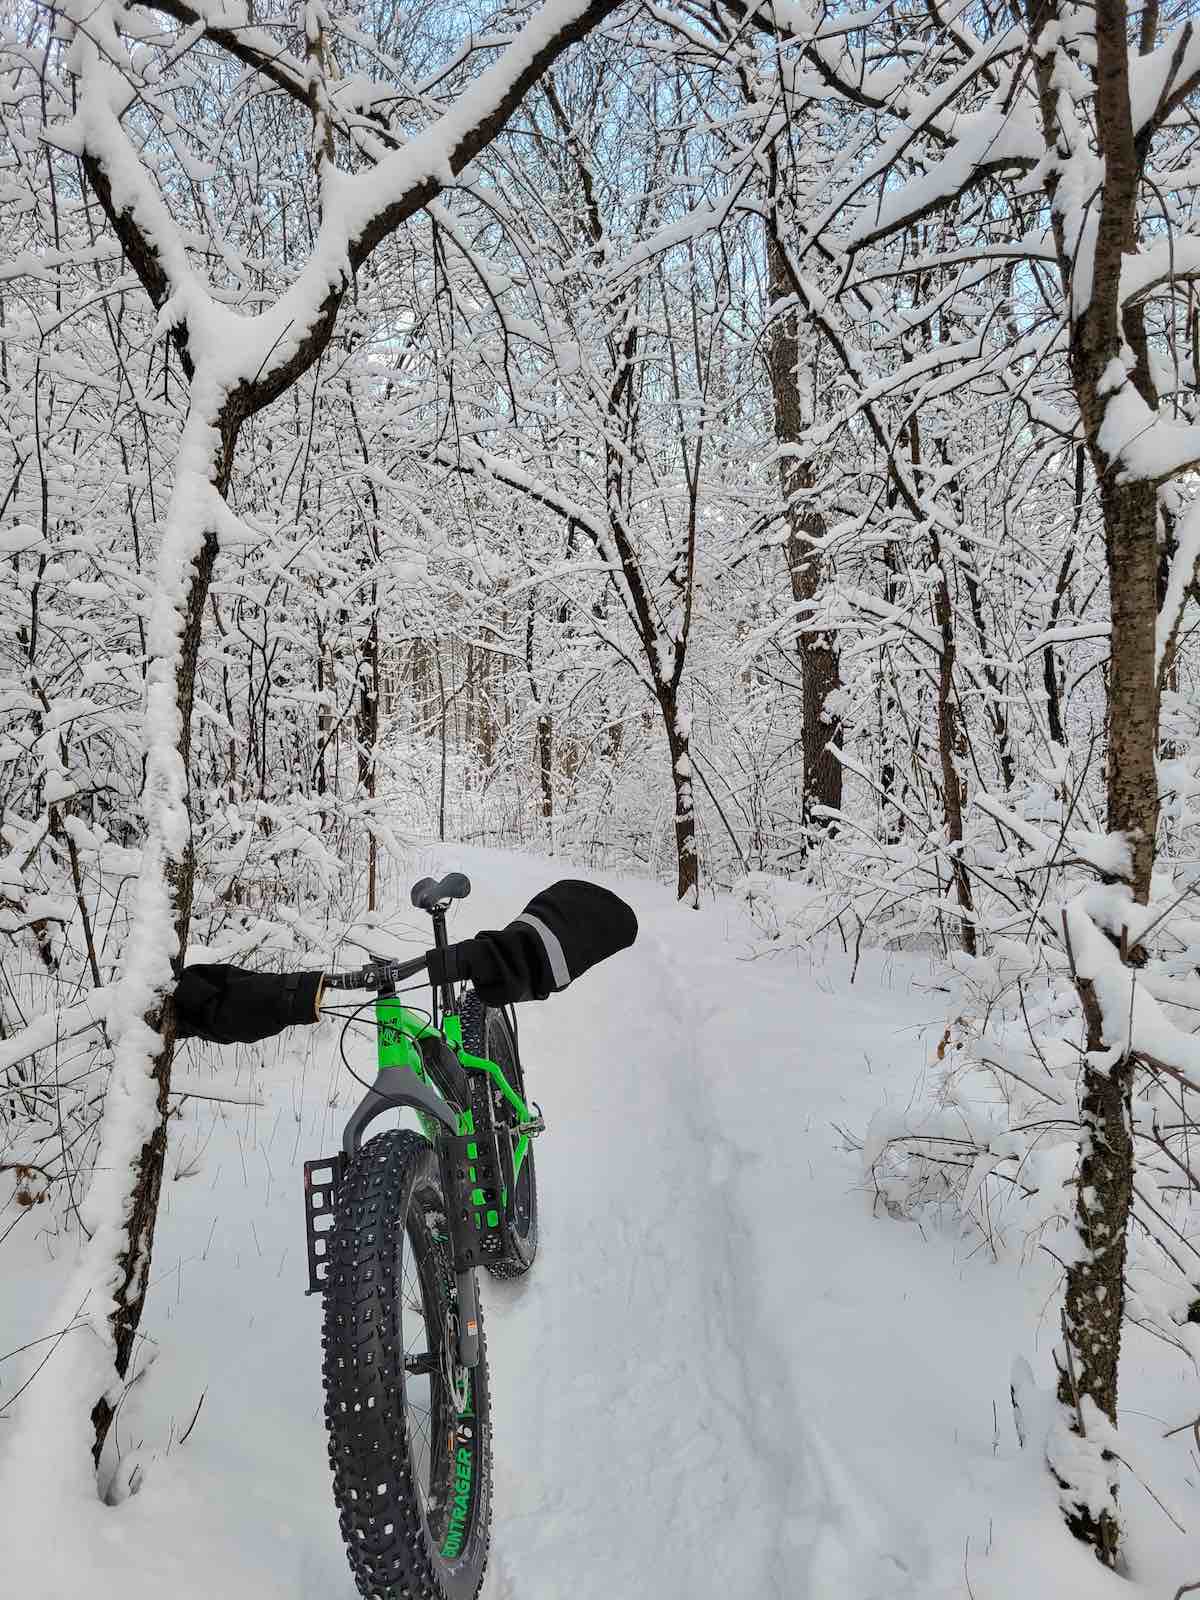 bikerumor pic of the day a green fat bike is leaning against a tree on a snow covered trail, snow is covering the trees surrounding the trail.